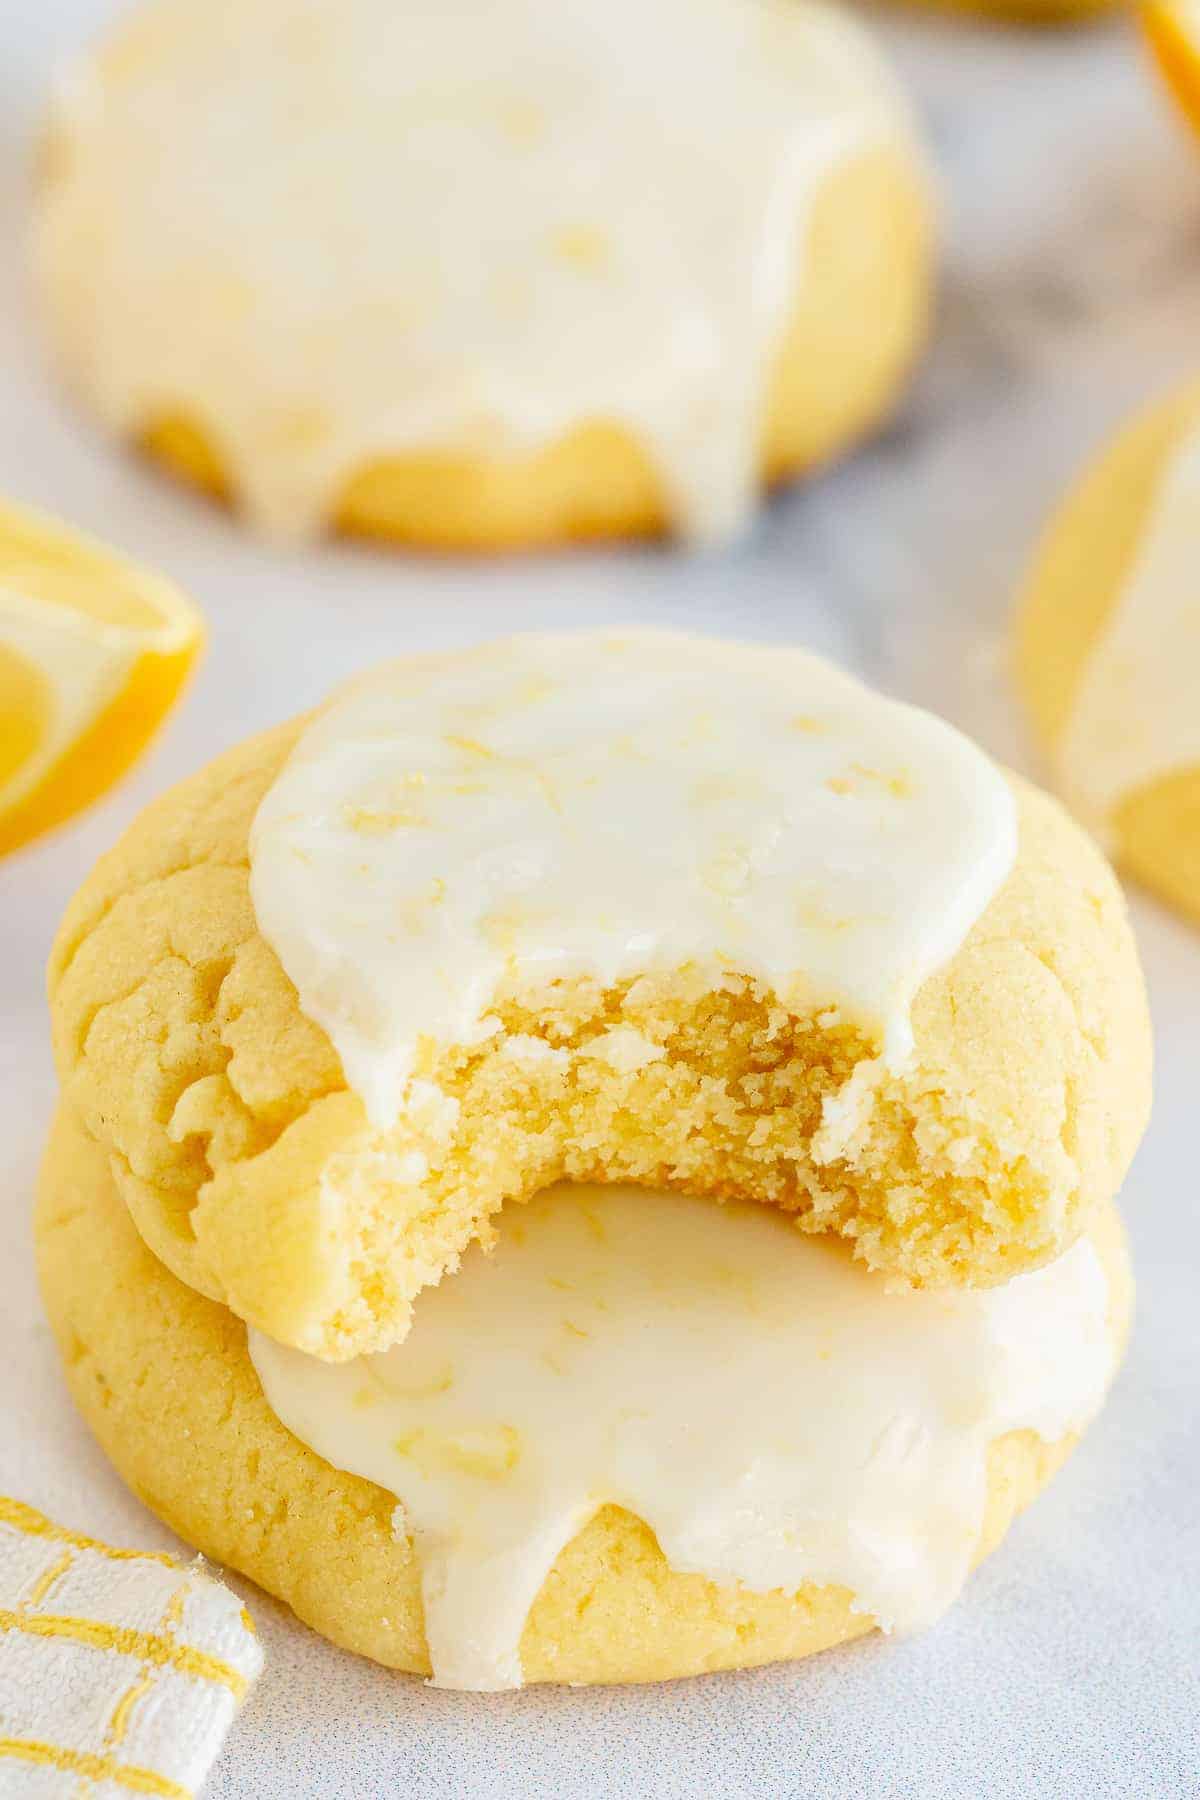 A unique lemon cookie recipe with a bite taken out of it.